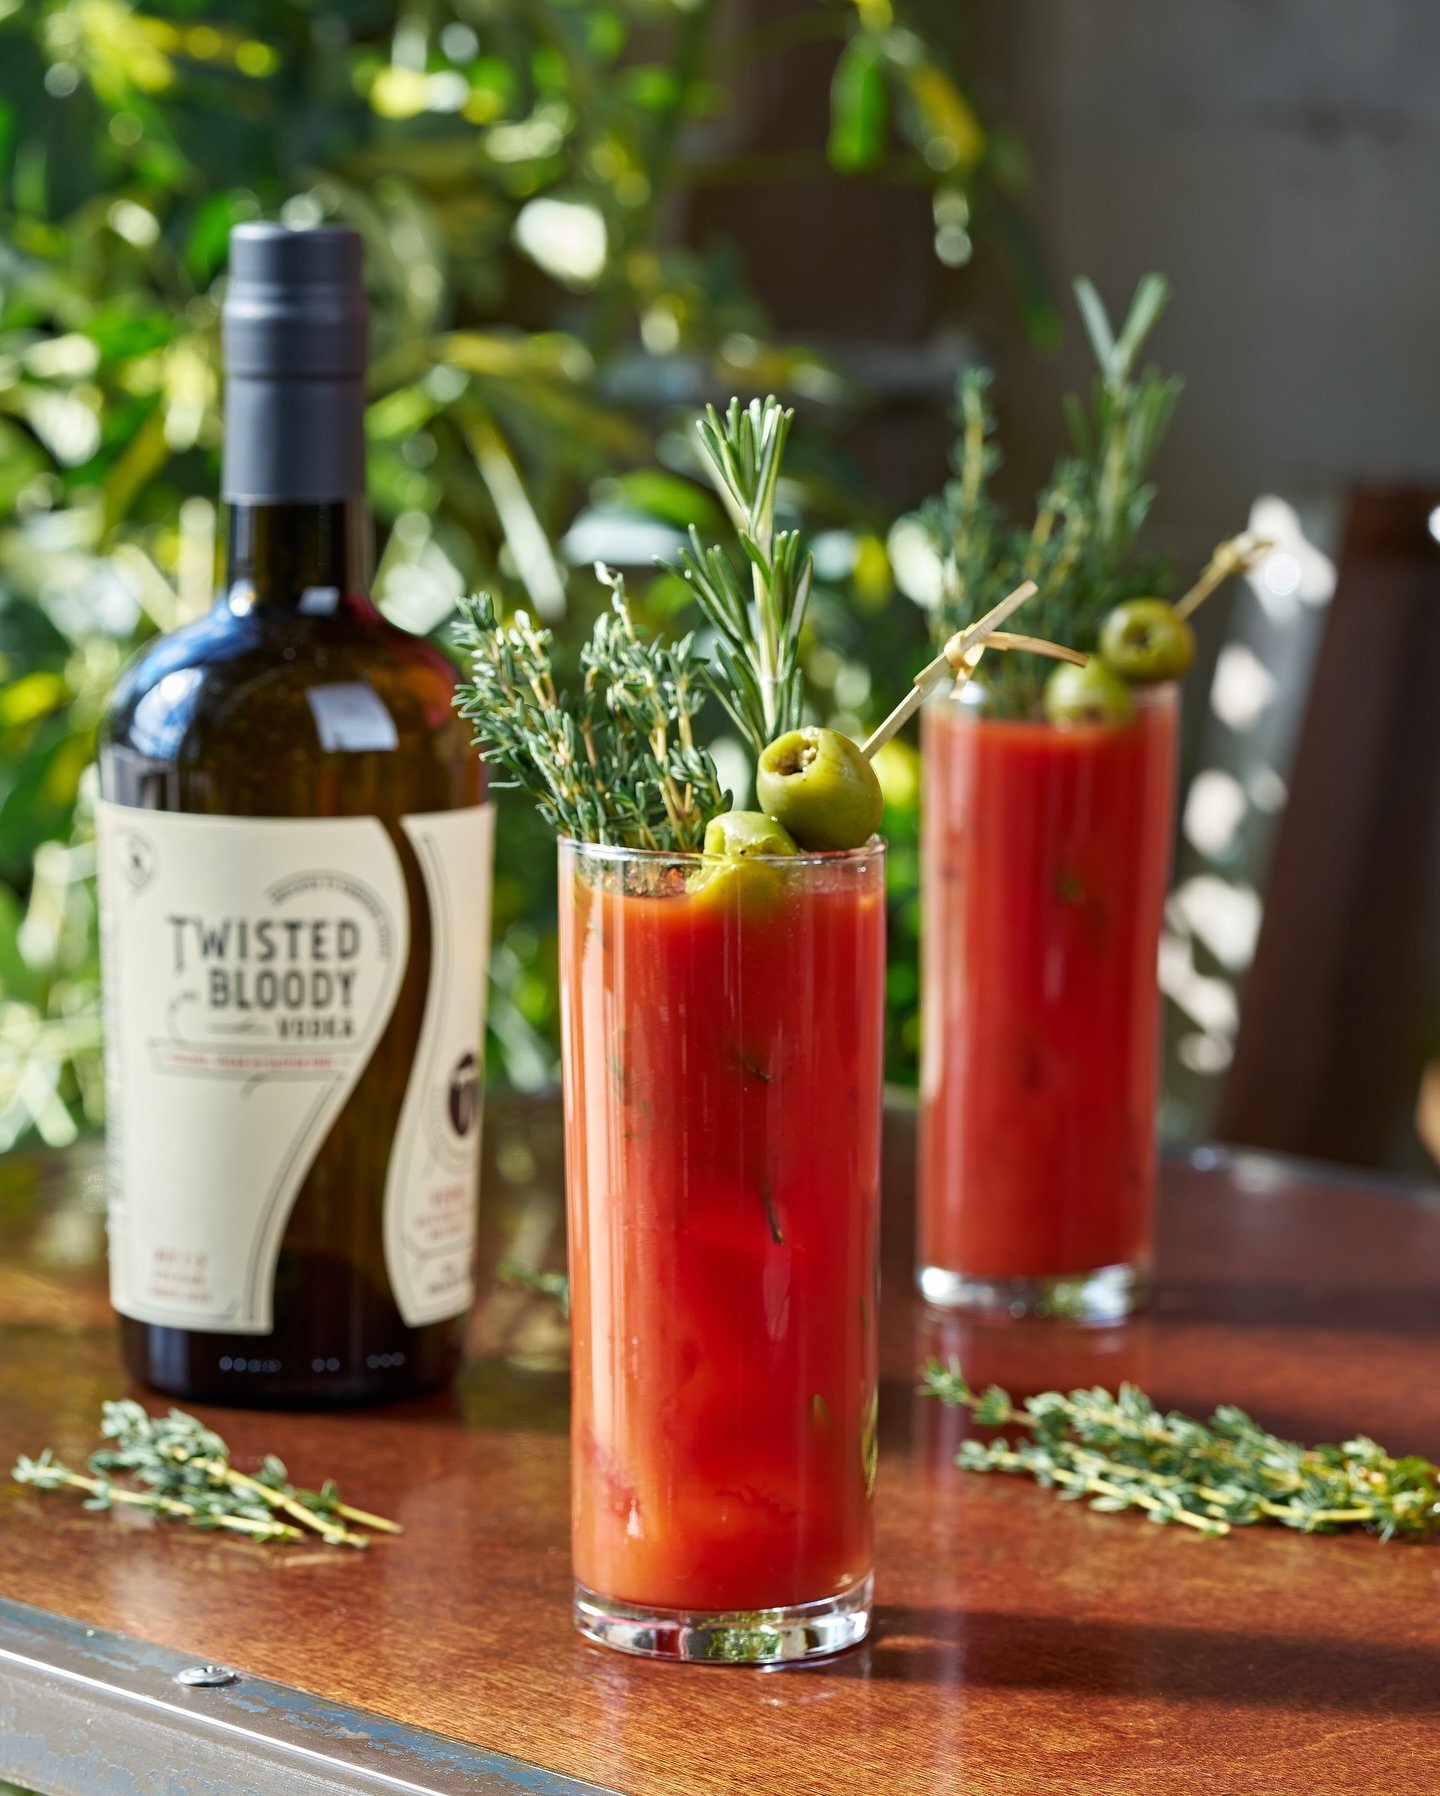 We&rsquo;re now open Sundays! Stop by for a Bloody Mary, made with our Twisted Bloody Vodka. 

Open 1-6pm!